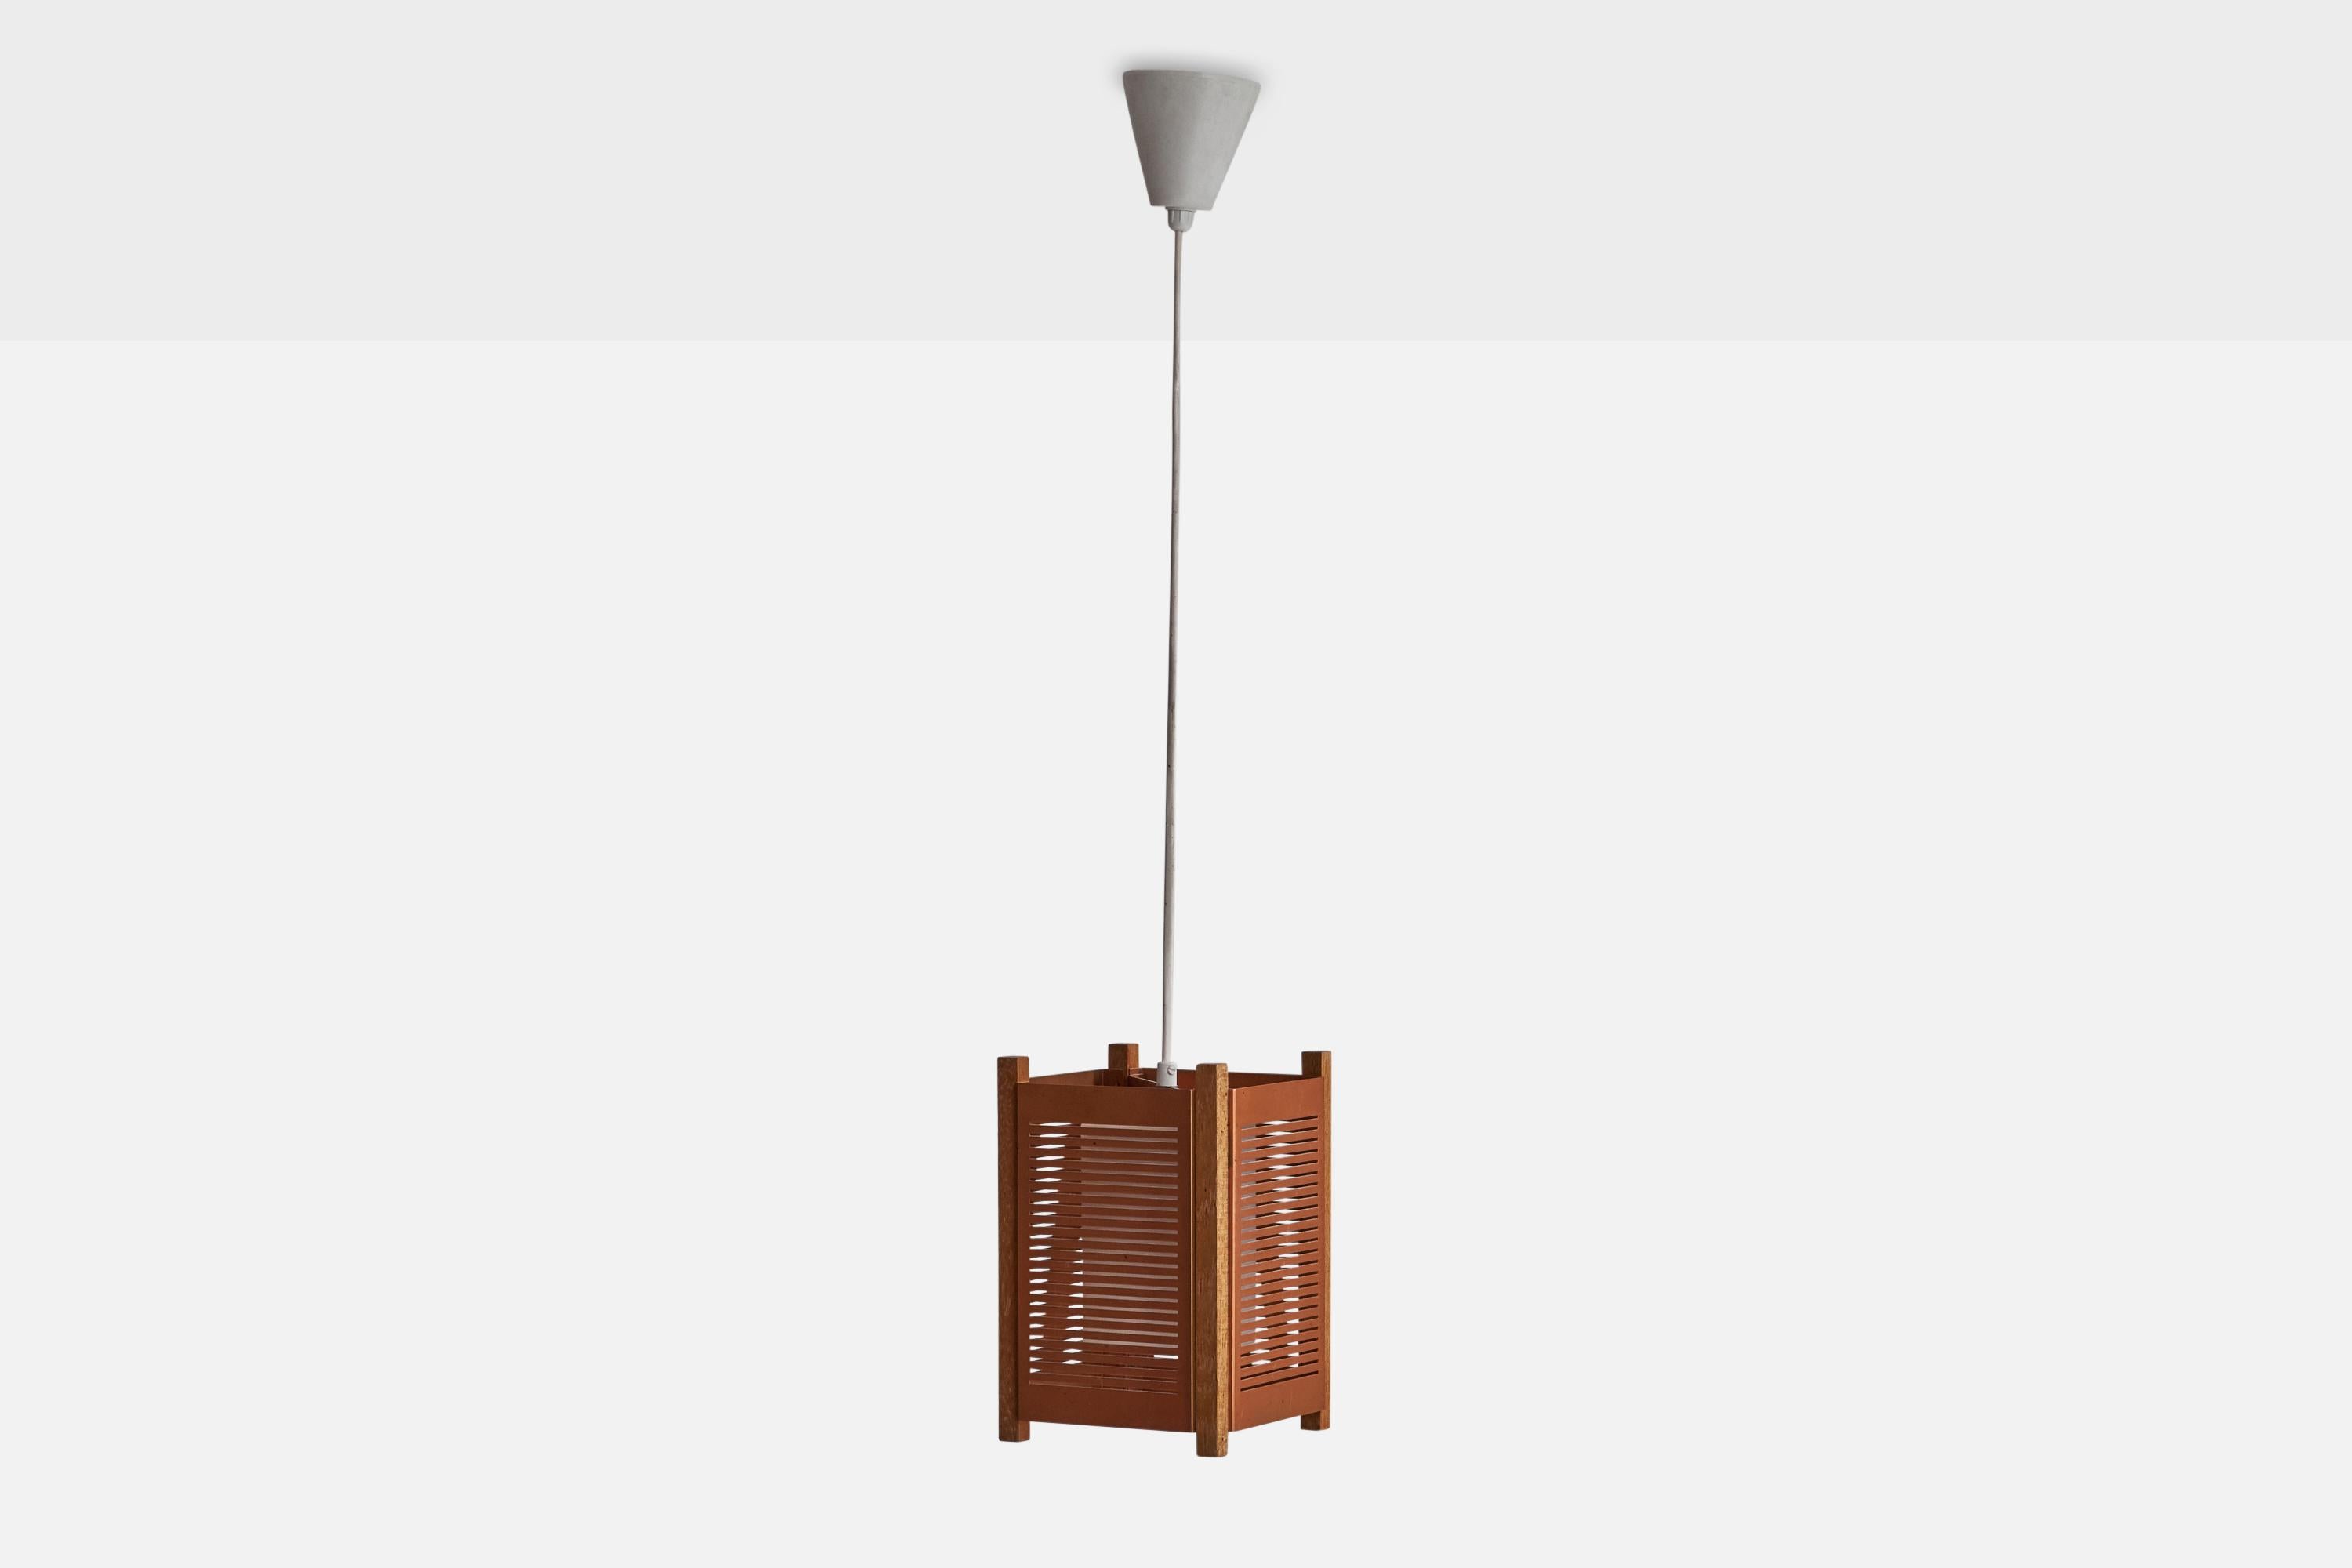 A copper, oak and opaline glass pendant light designed and produced in Sweden, 1950s.

Dimensions of canopy (inches): 3.75” H x 3.5” Diameter
Socket takes standard E-26 bulbs. 1 socket.There is no maximum wattage stated on the fixture. All lighting